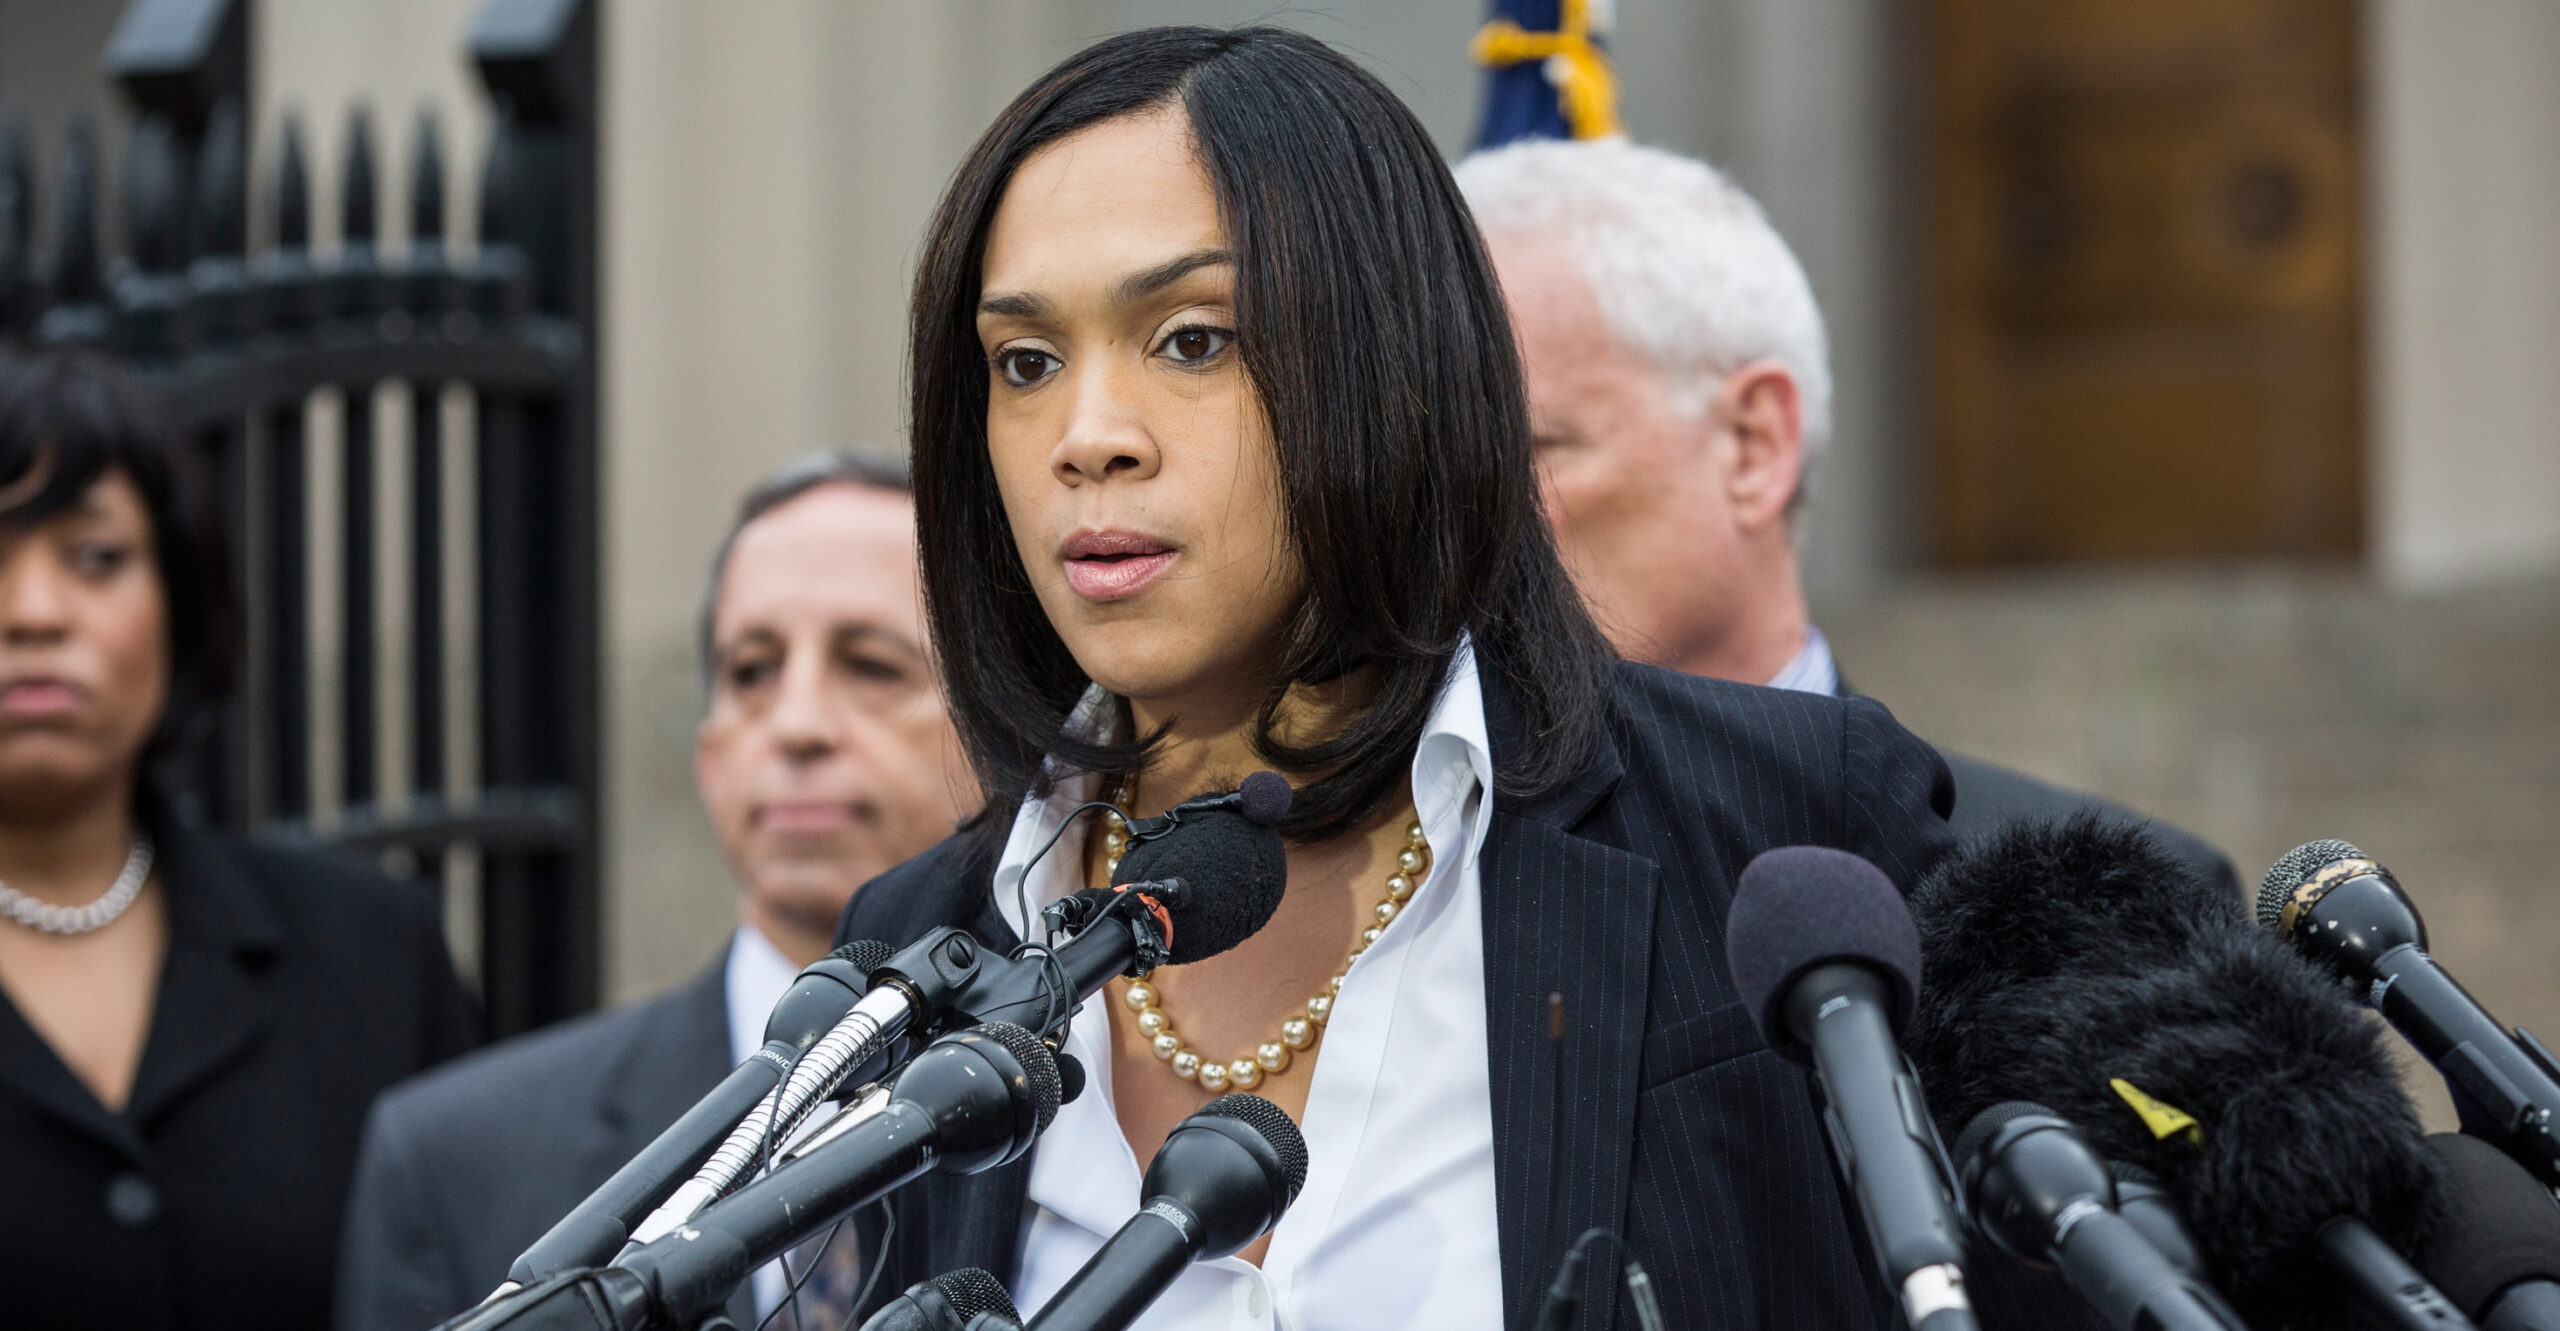 Baltimore's Rogue Prosecutor Mosby Facing 3 Probes of Official Duties, Travel, Gifts